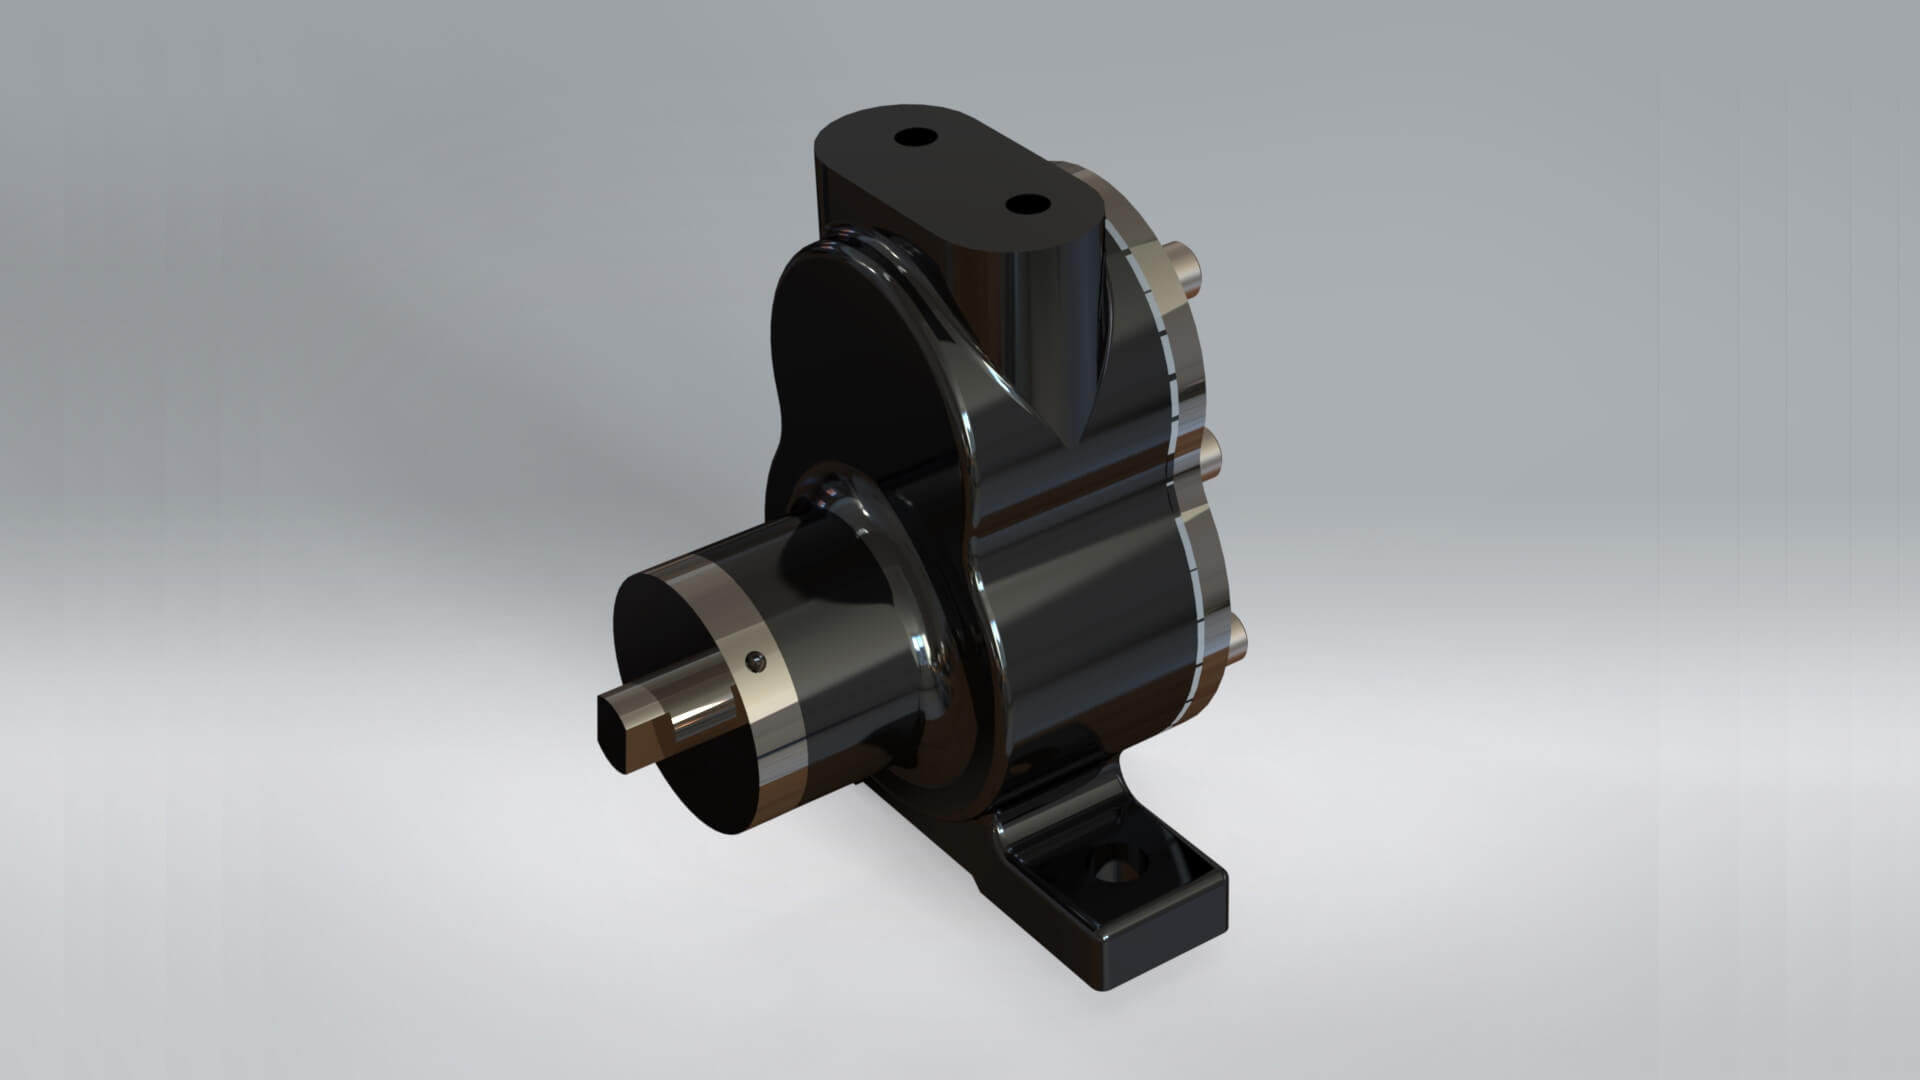 A 3D CAD drawing of the interior of an oil pump.